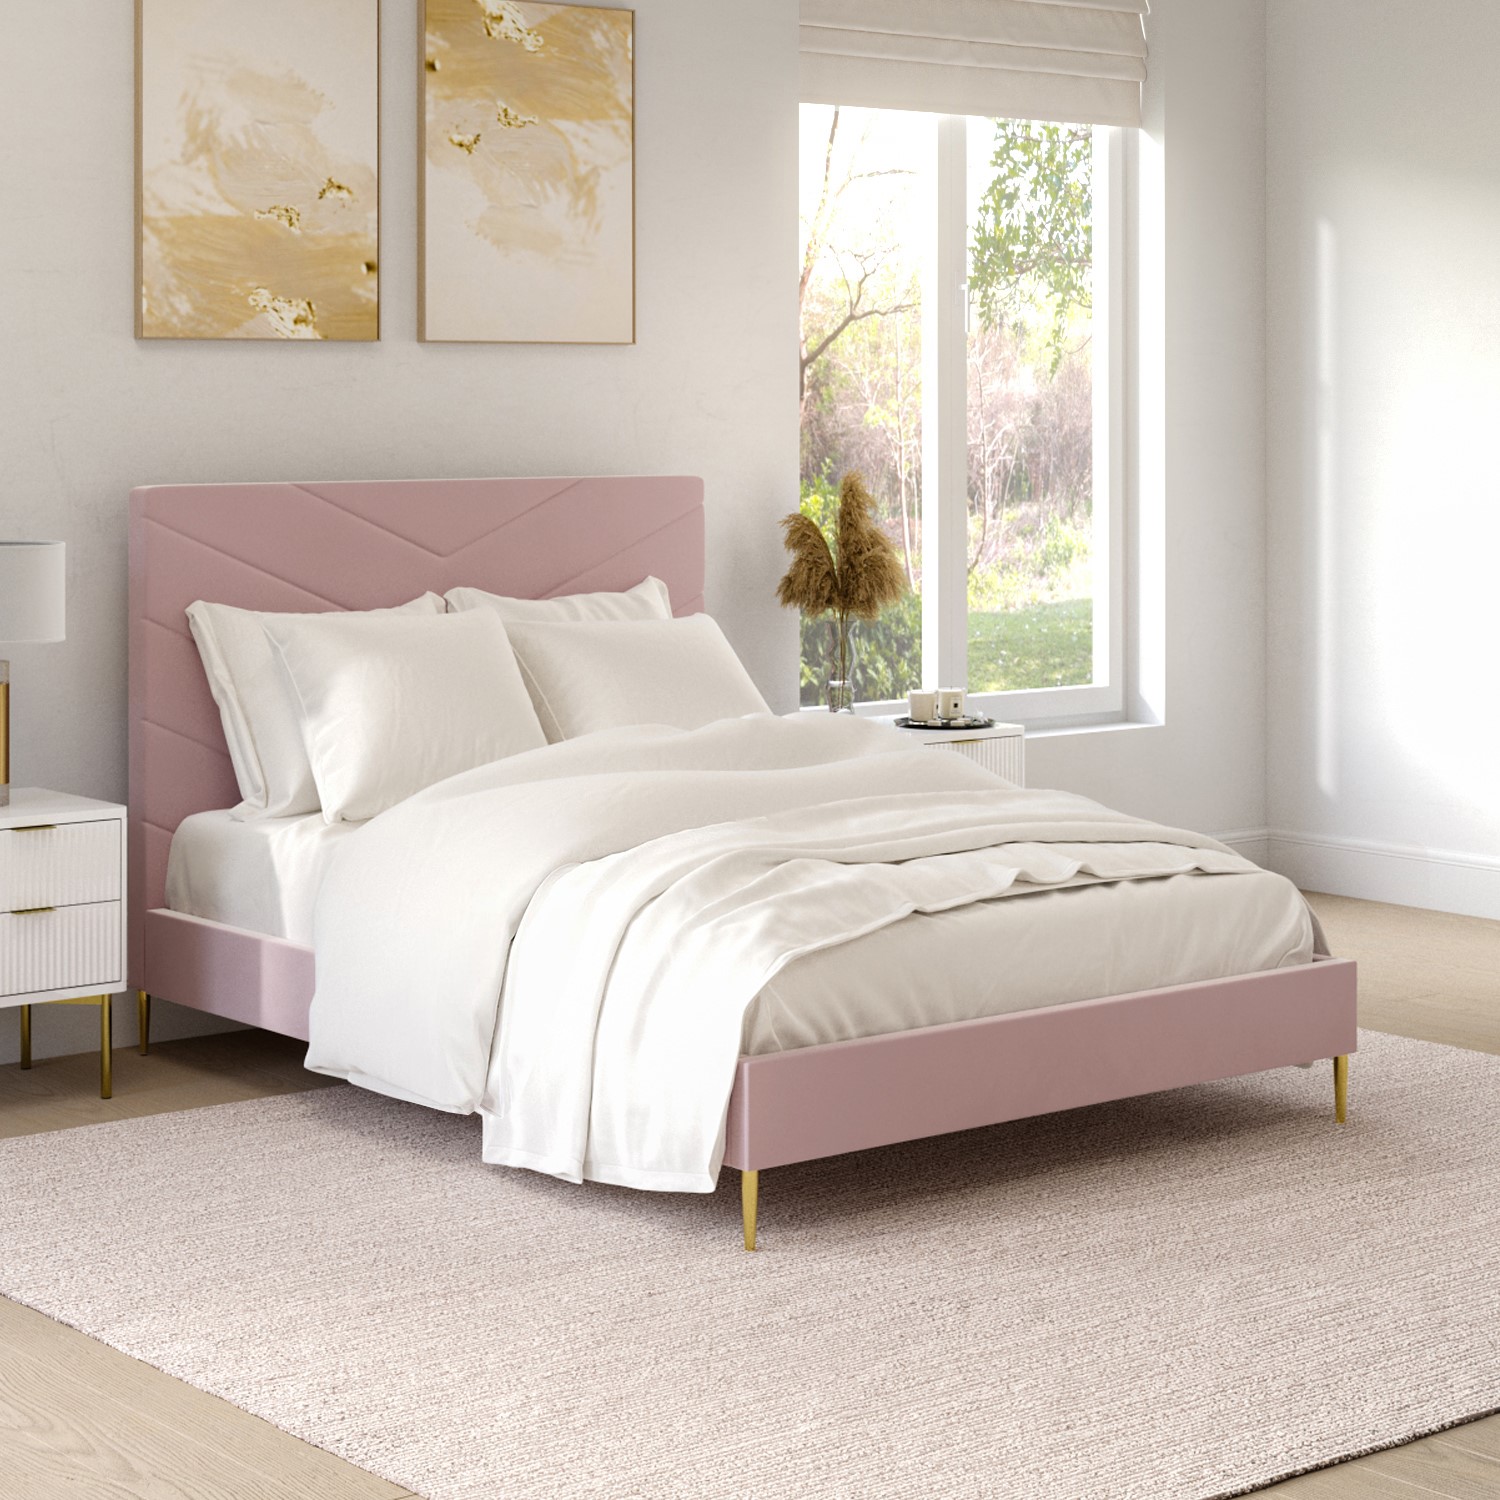 Photo of Pink velvet king size bed frame with chevron headboard - aaliyah